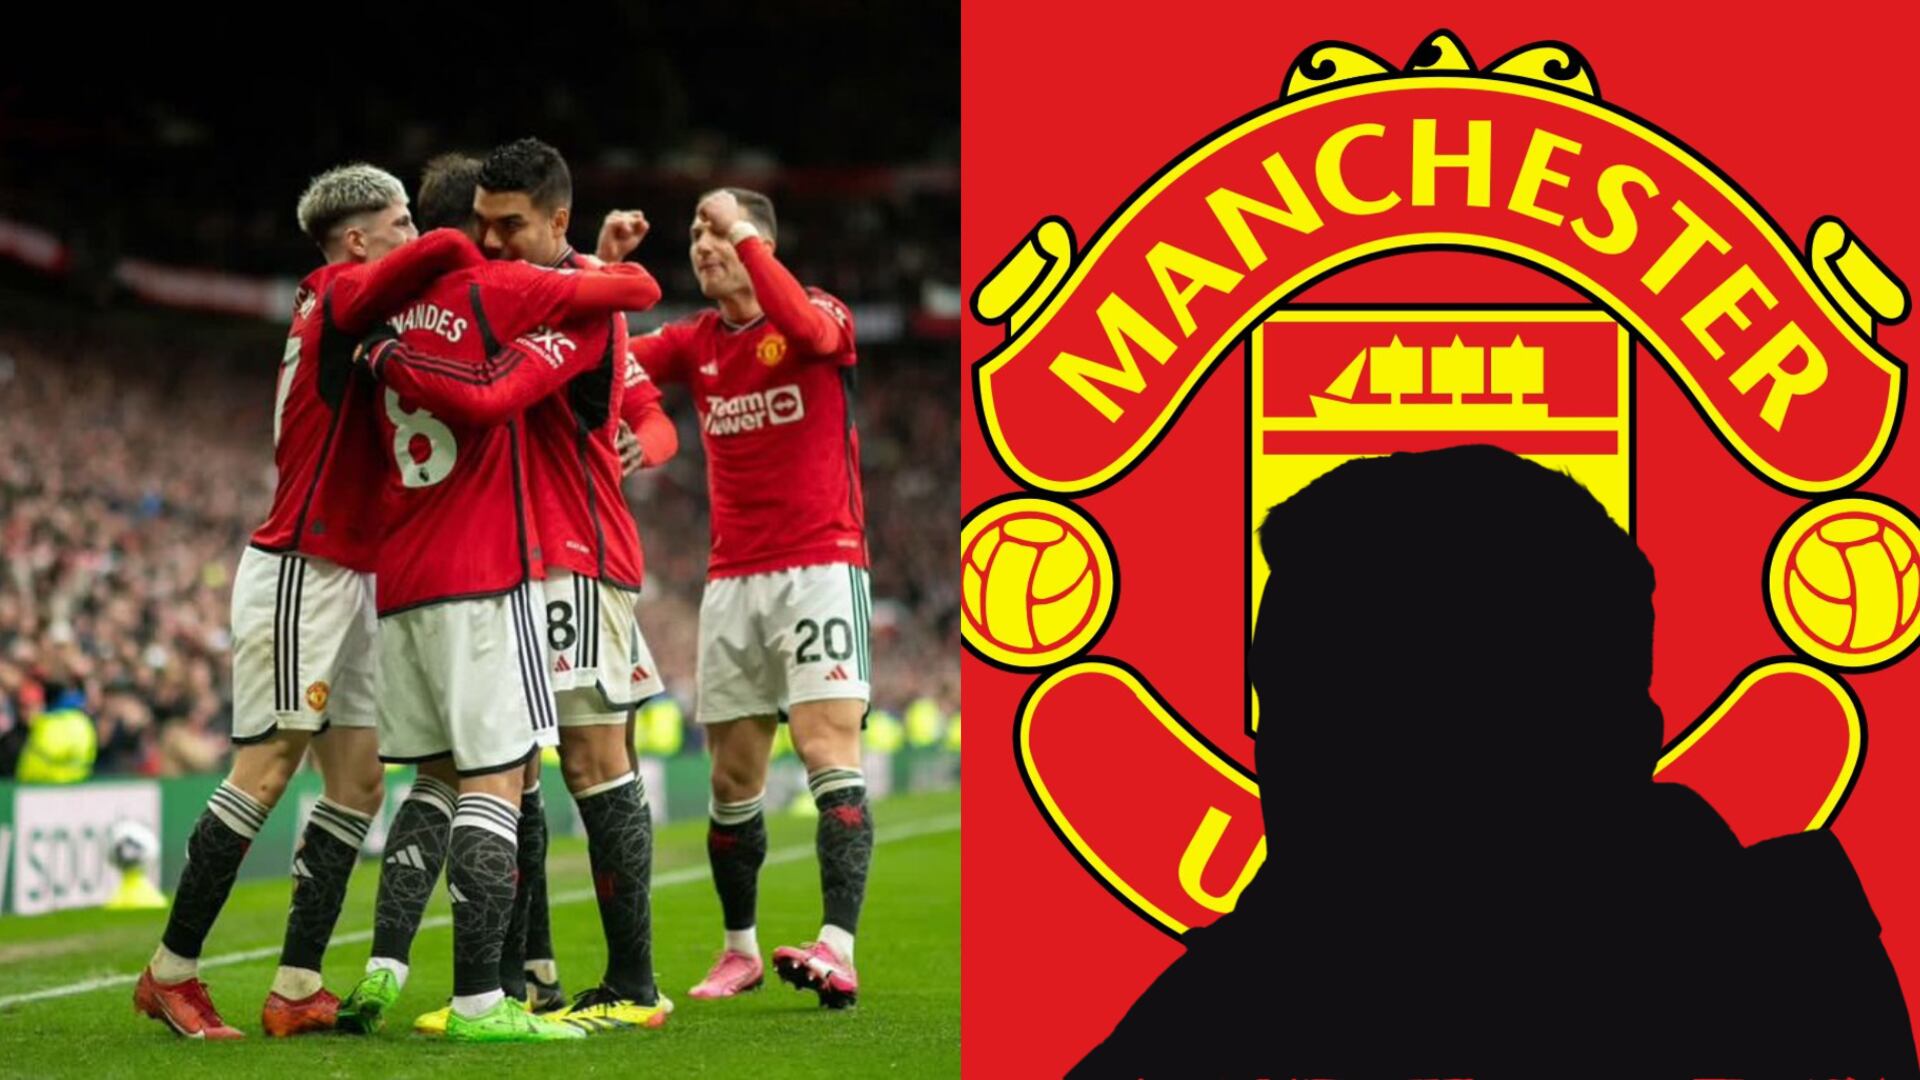 Despite drawing vs Liverpool, Man United gets heavily criticized by club legend